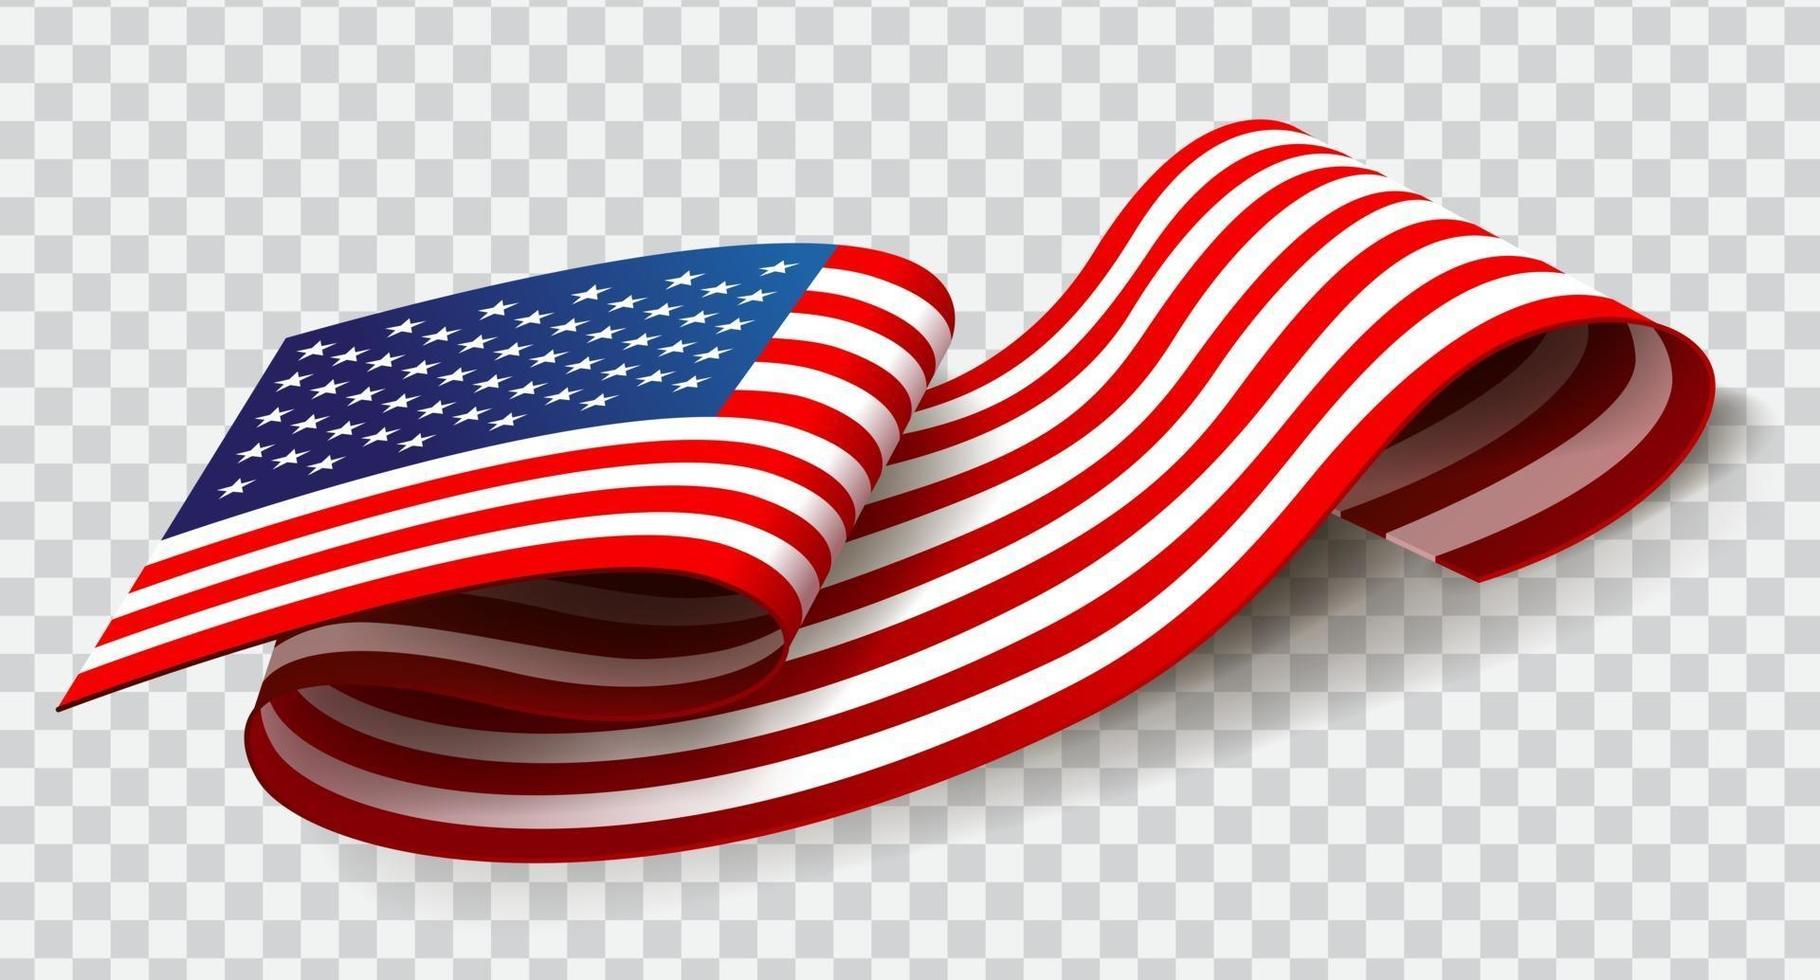 United States of America waving flag on transparent background for 4th of July. vector